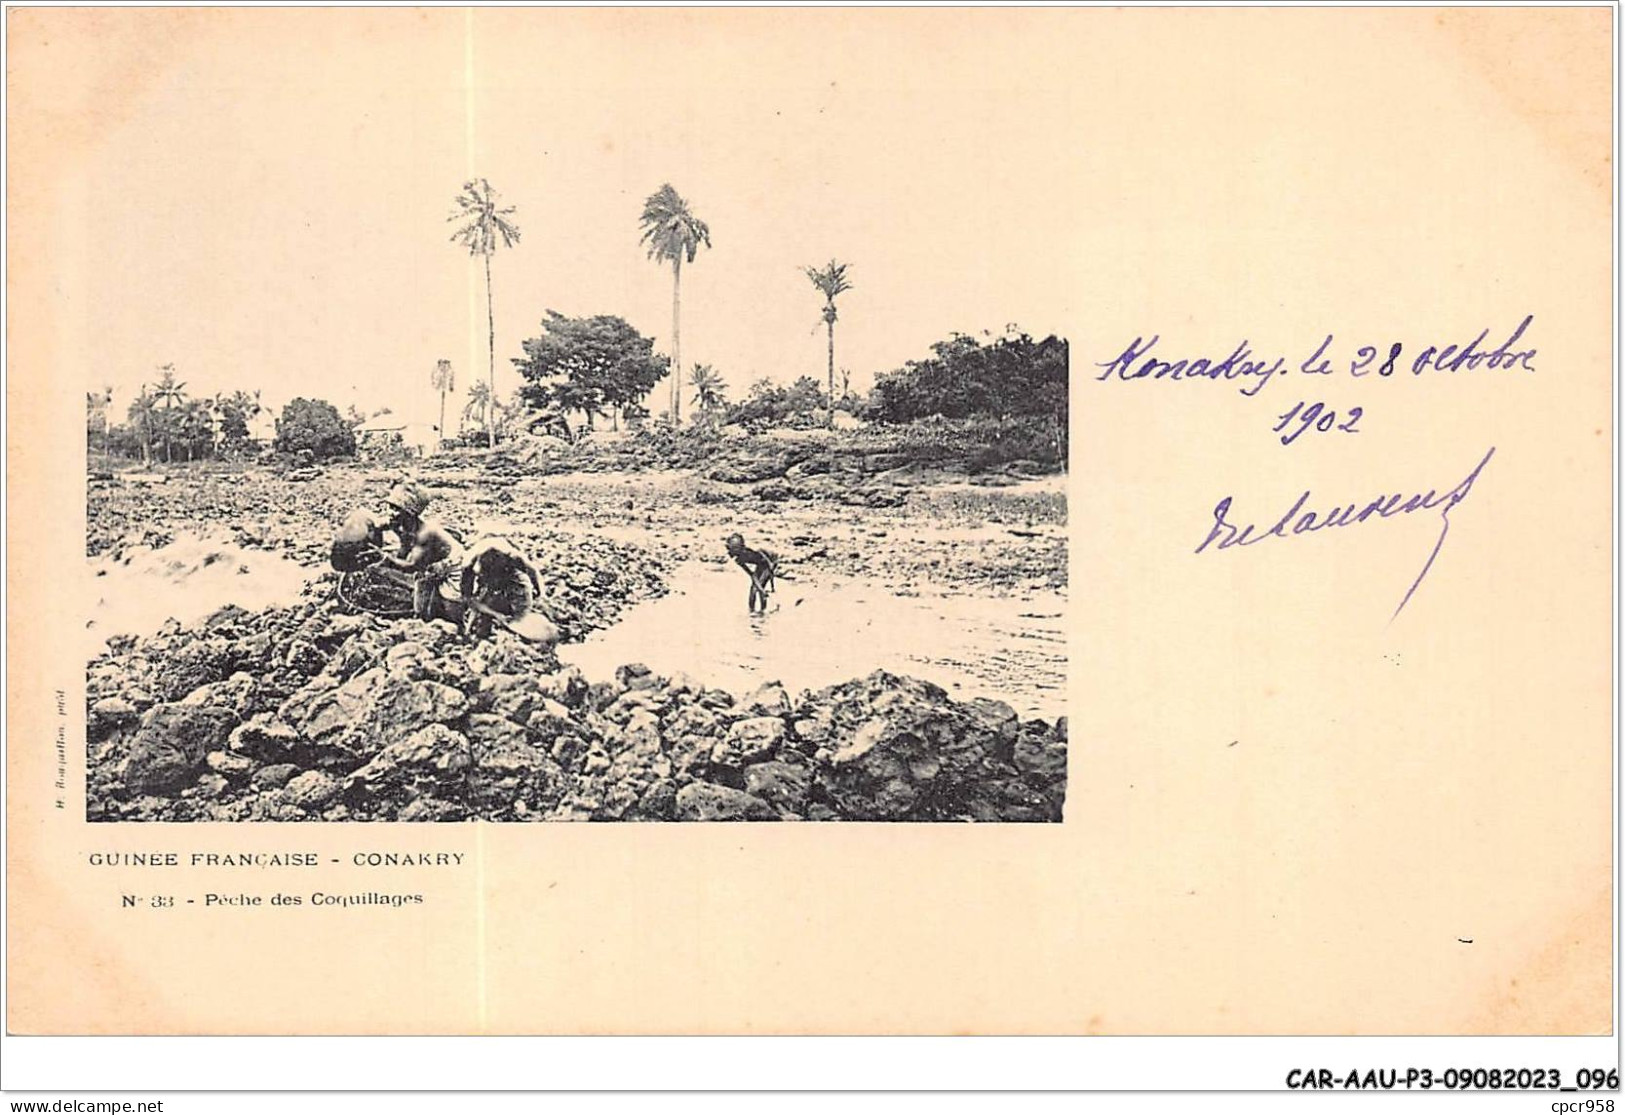 CAR-AAUP3-0195 - GUINEE - GUINEE FRANCAISE - CONAKRY - Peche Des Coquillages - Guinea Francese